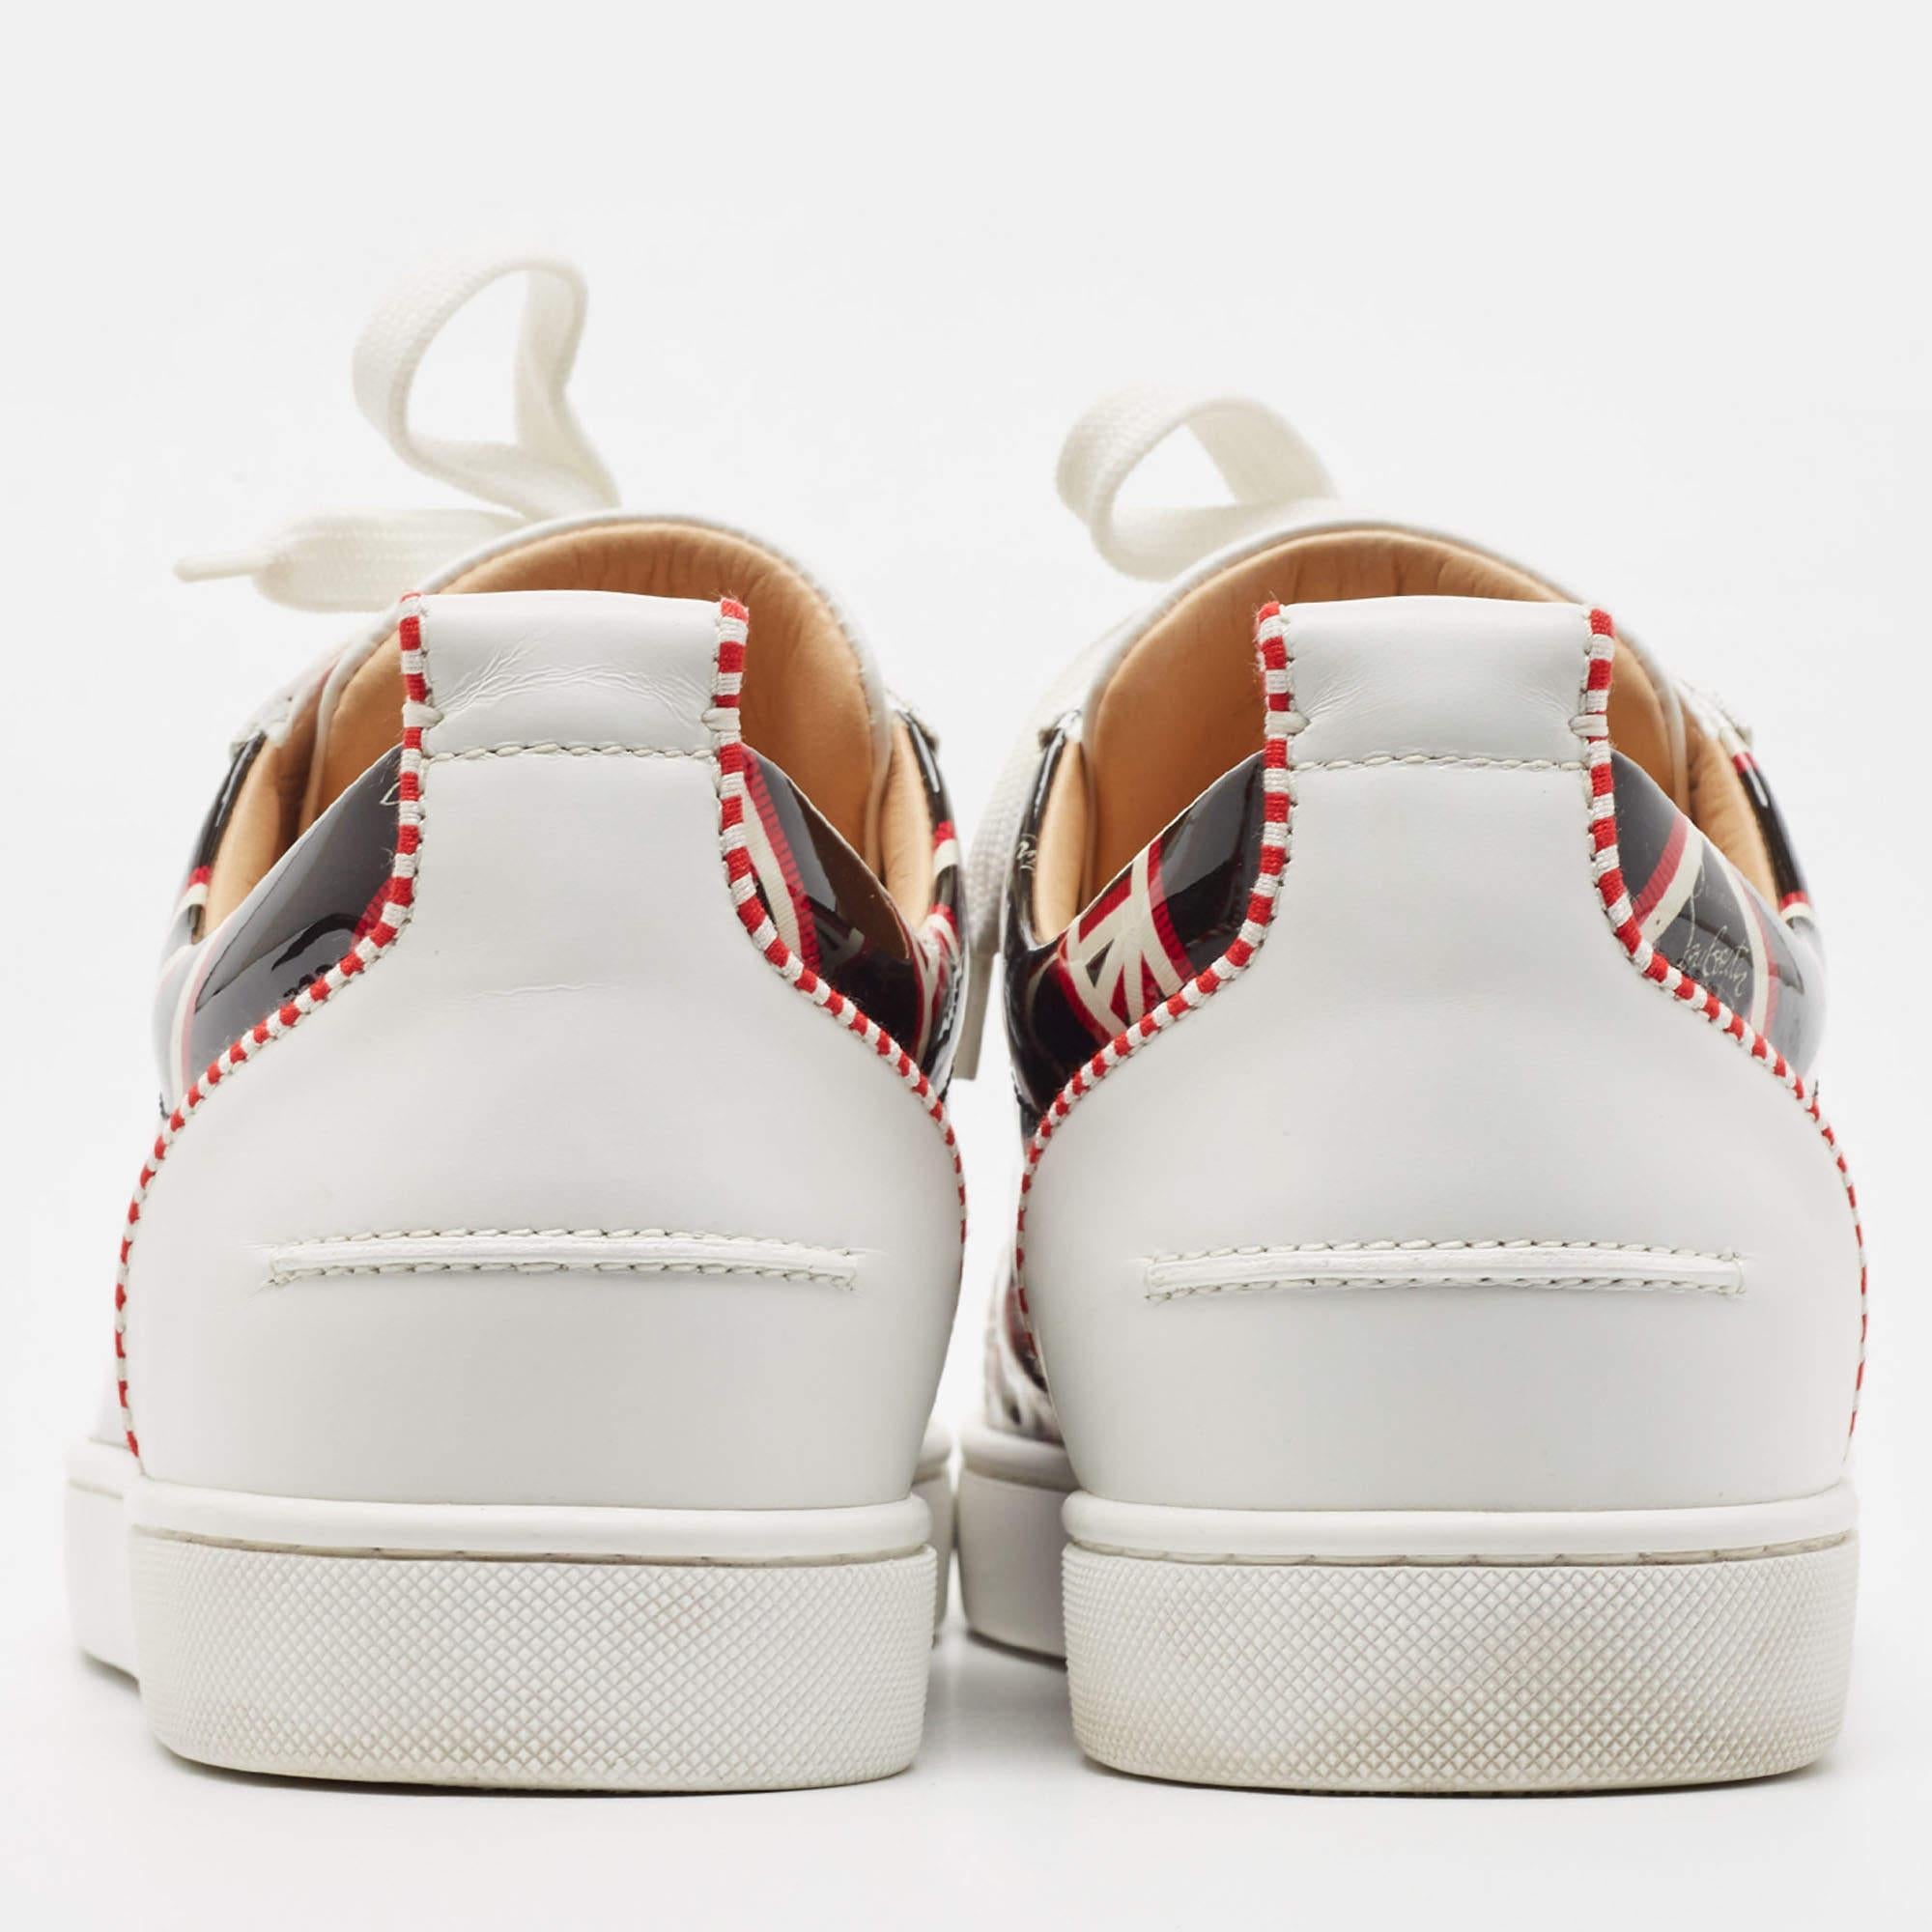 Men's Christian Louboutin Printed Patent and Leather Orlato Sneakers Size 42.5 For Sale